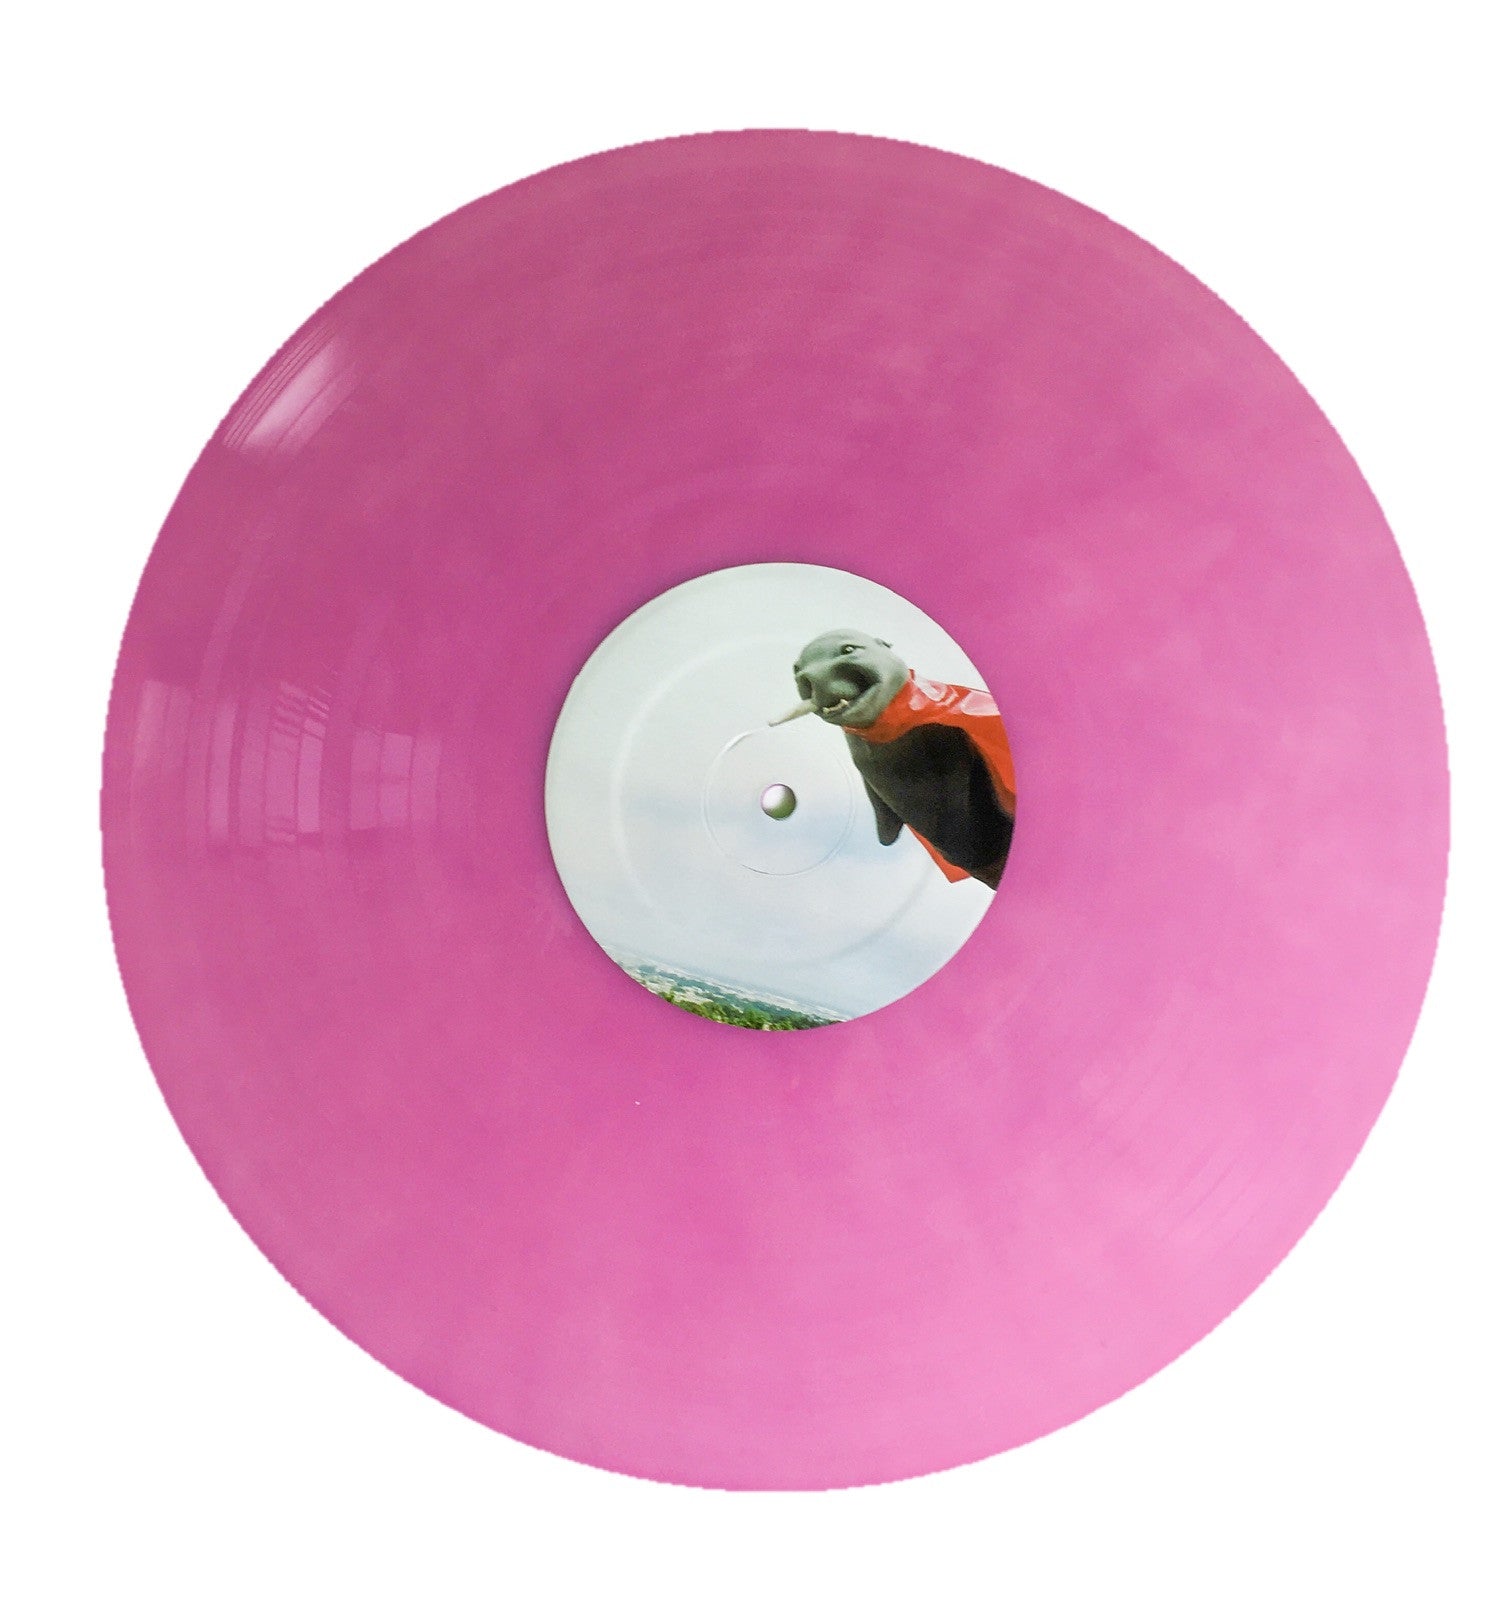 Superseal purple vinyl!🔥SOLD OUT🔥